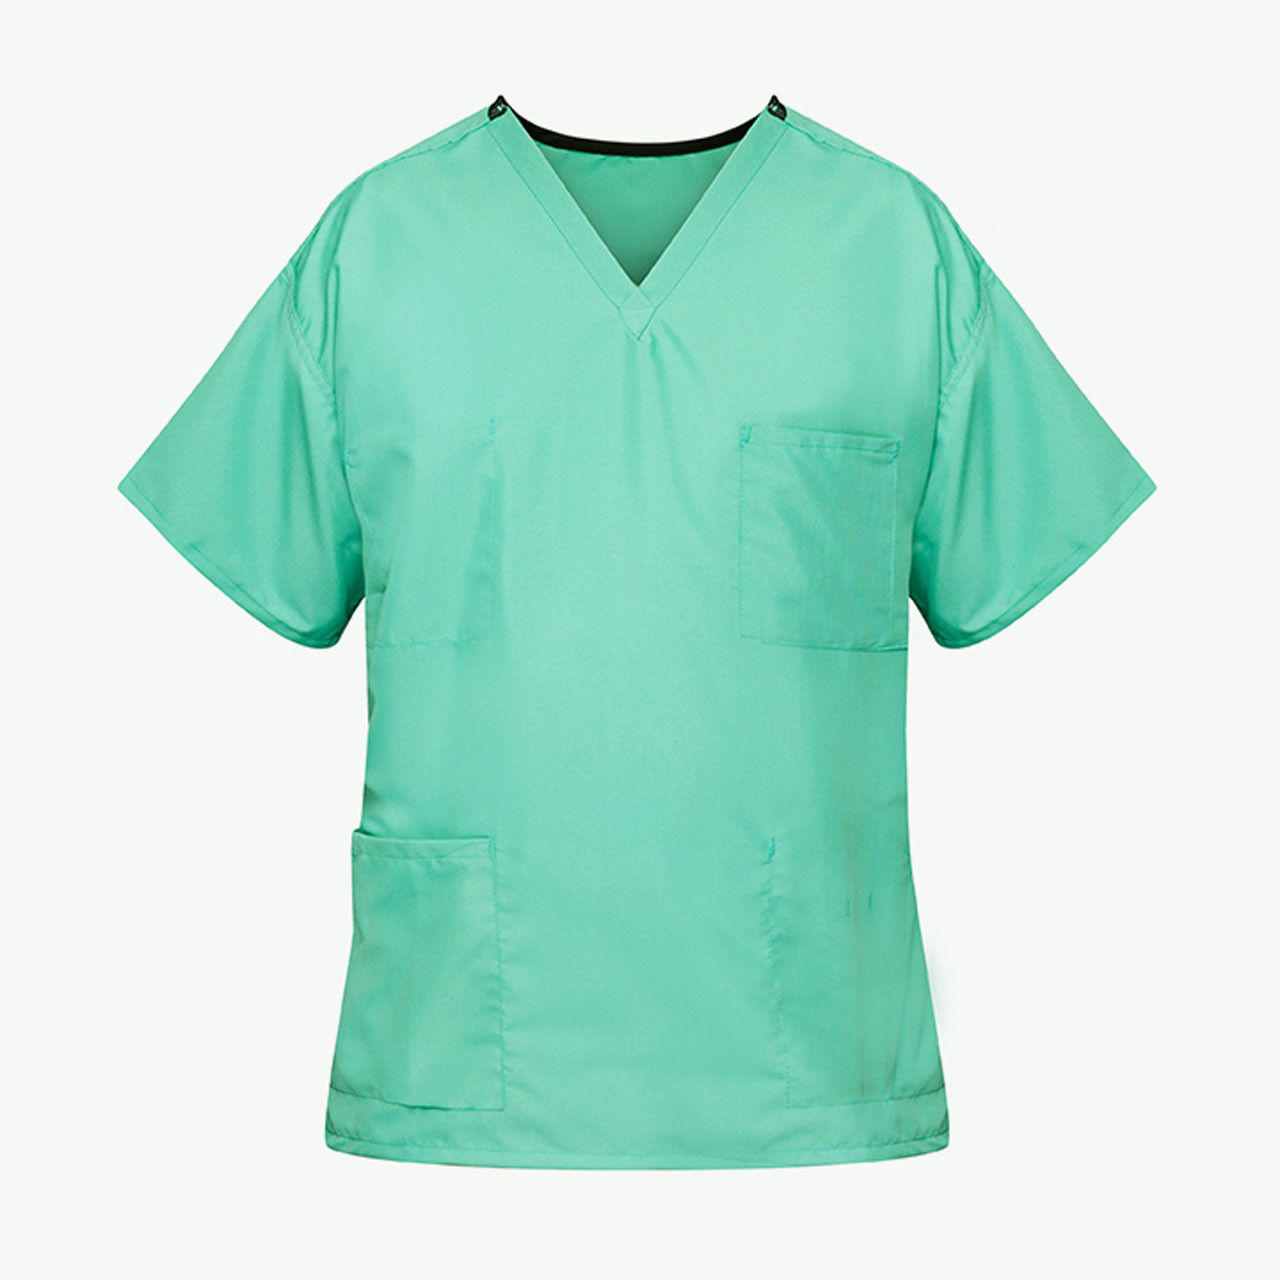 What color are these Scrub Tops? Are they jade green scrubs?